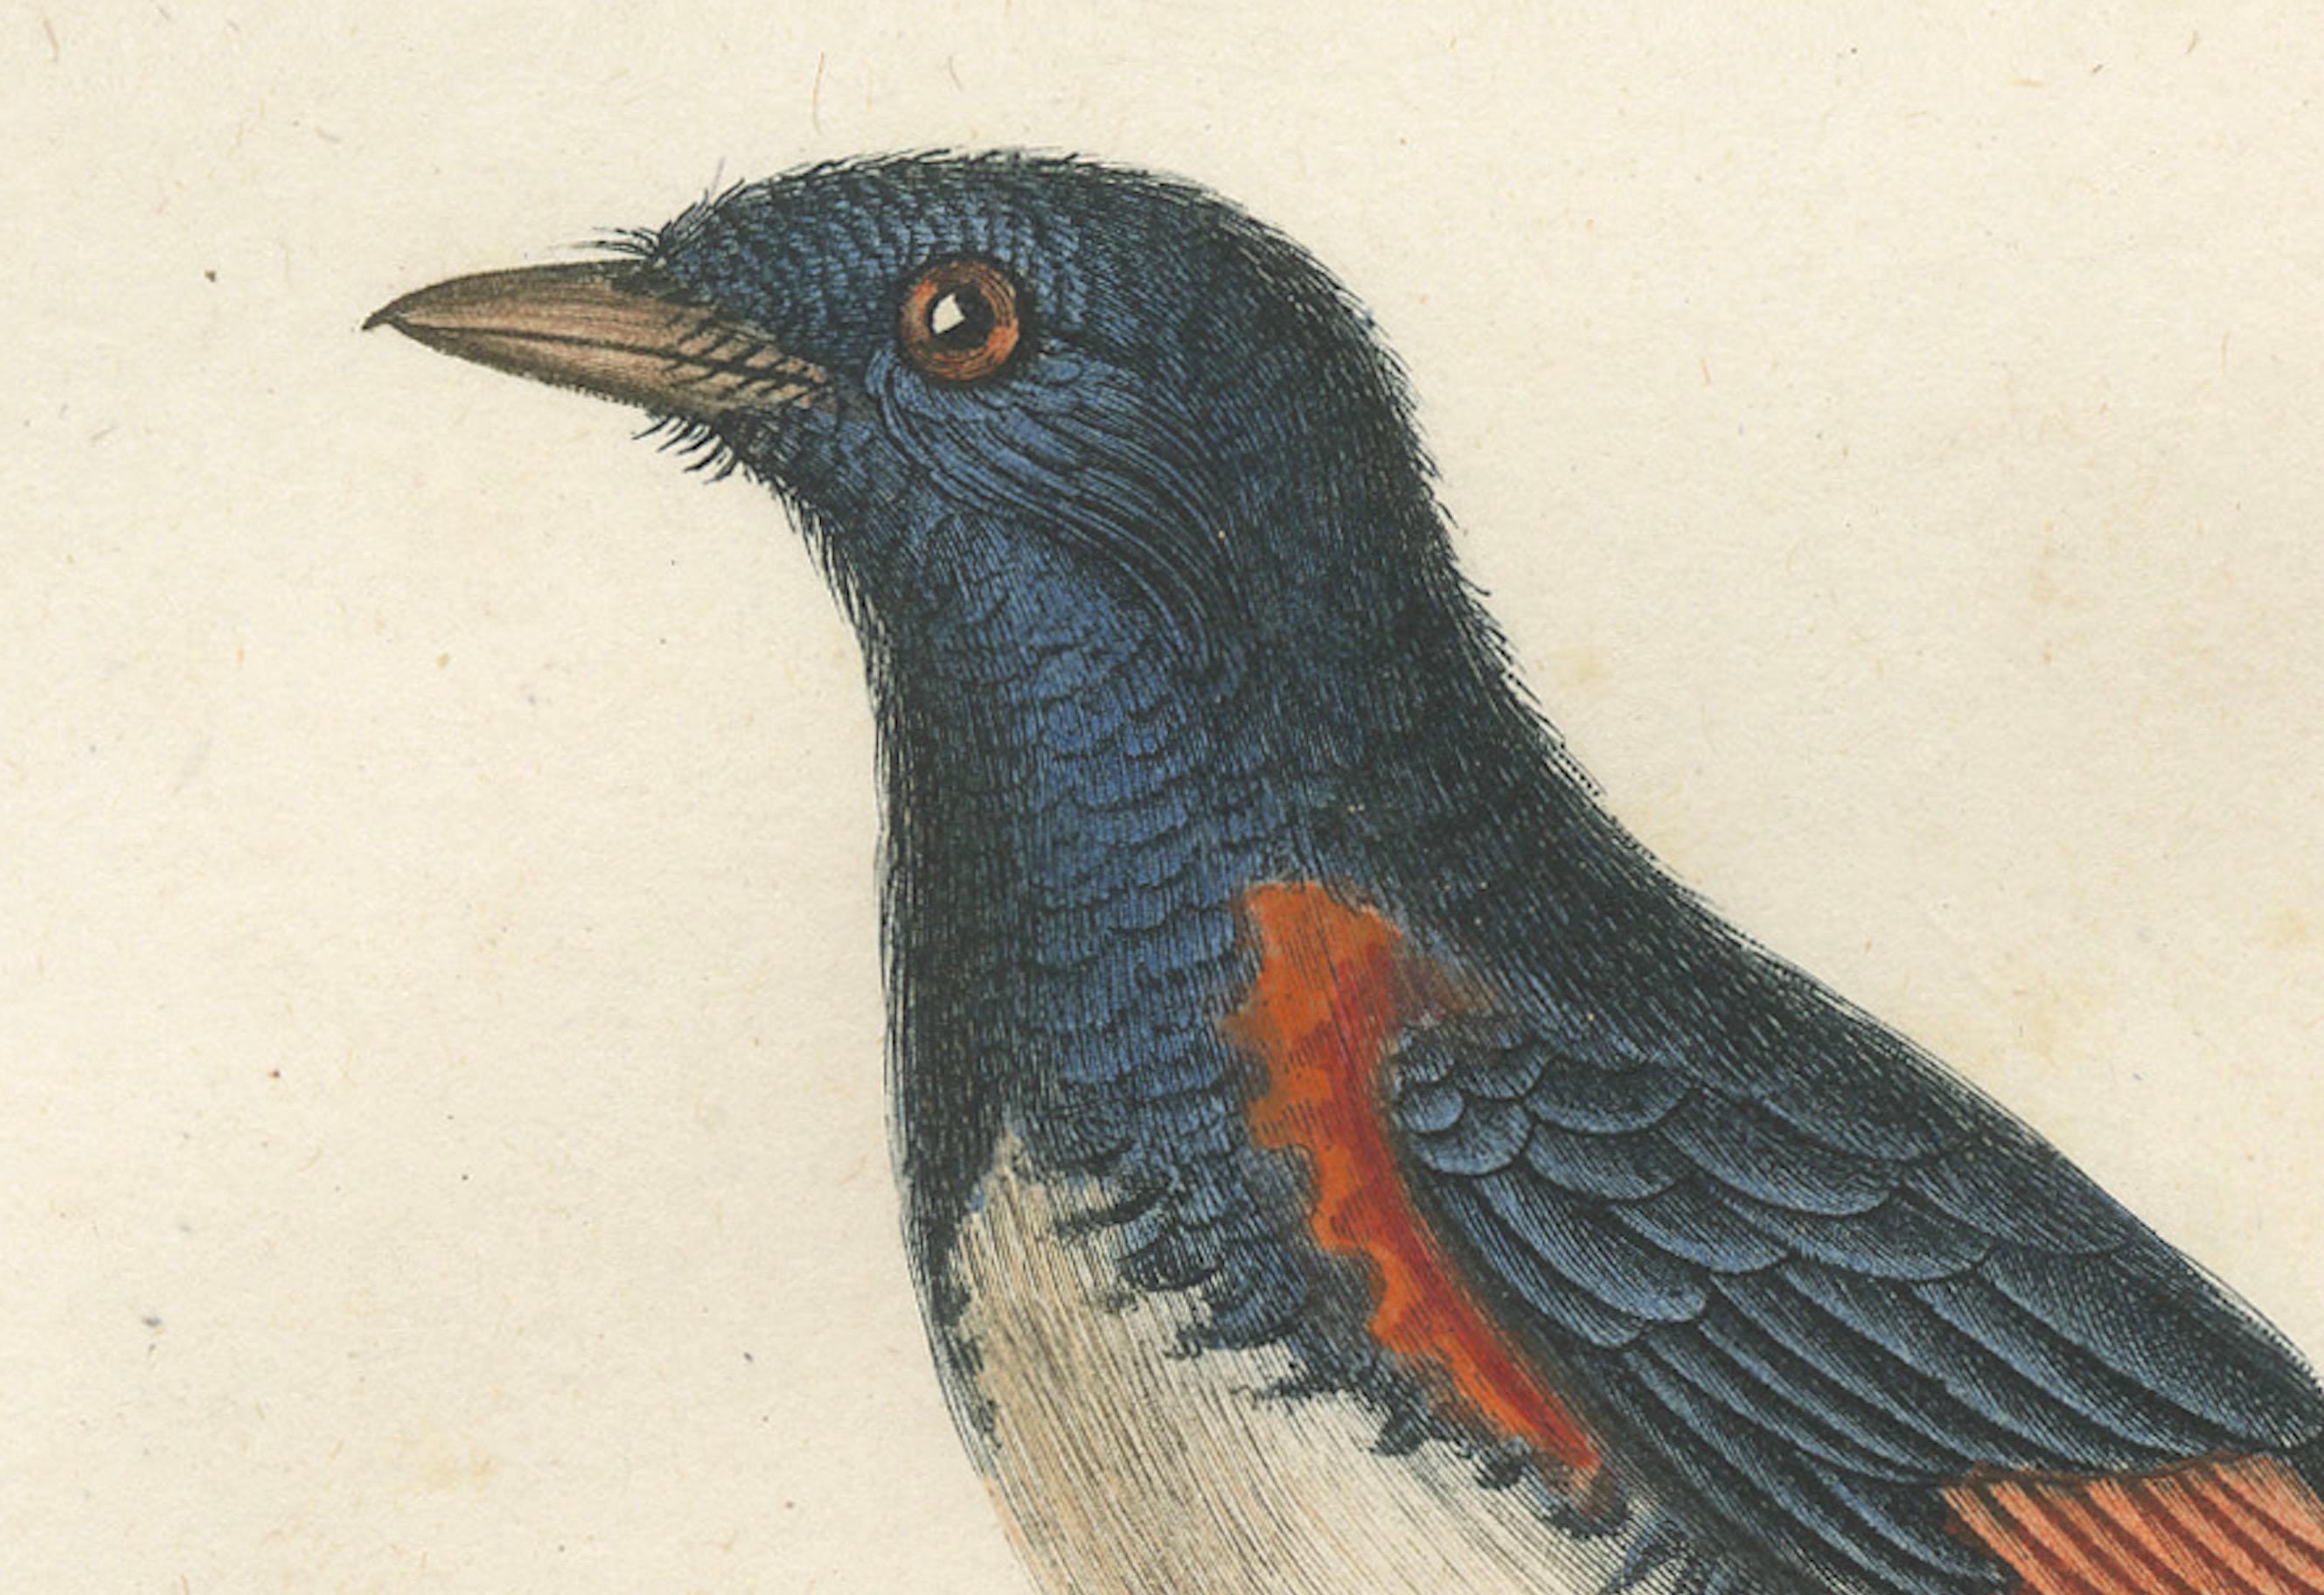 This original vintage illustratiton is a handcolored antique print titled 'Le Moucberolle doré mâle', which showcases a male American redstart (Setophaga ruticilla), a vibrant member of the New World warbler family. The bird is depicted in